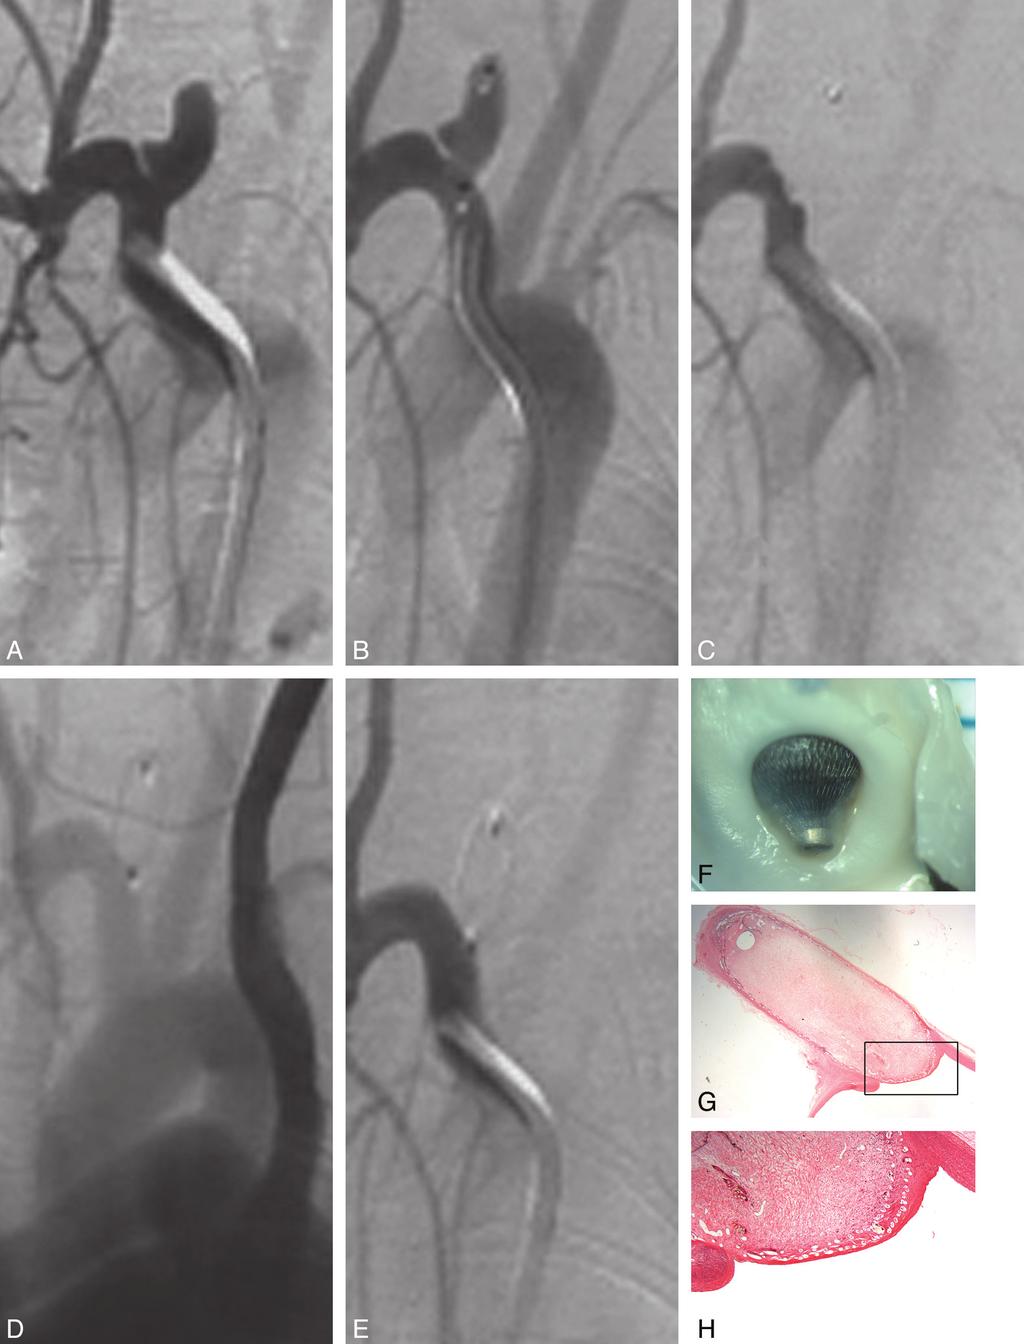 Fig 2. Representative case 5 in the Table. A, Pretreatment DSA demonstrates the aneurysm. B, DSA immediately after placement of Luna AES shows some cessation of intra-aneurysmal flow.